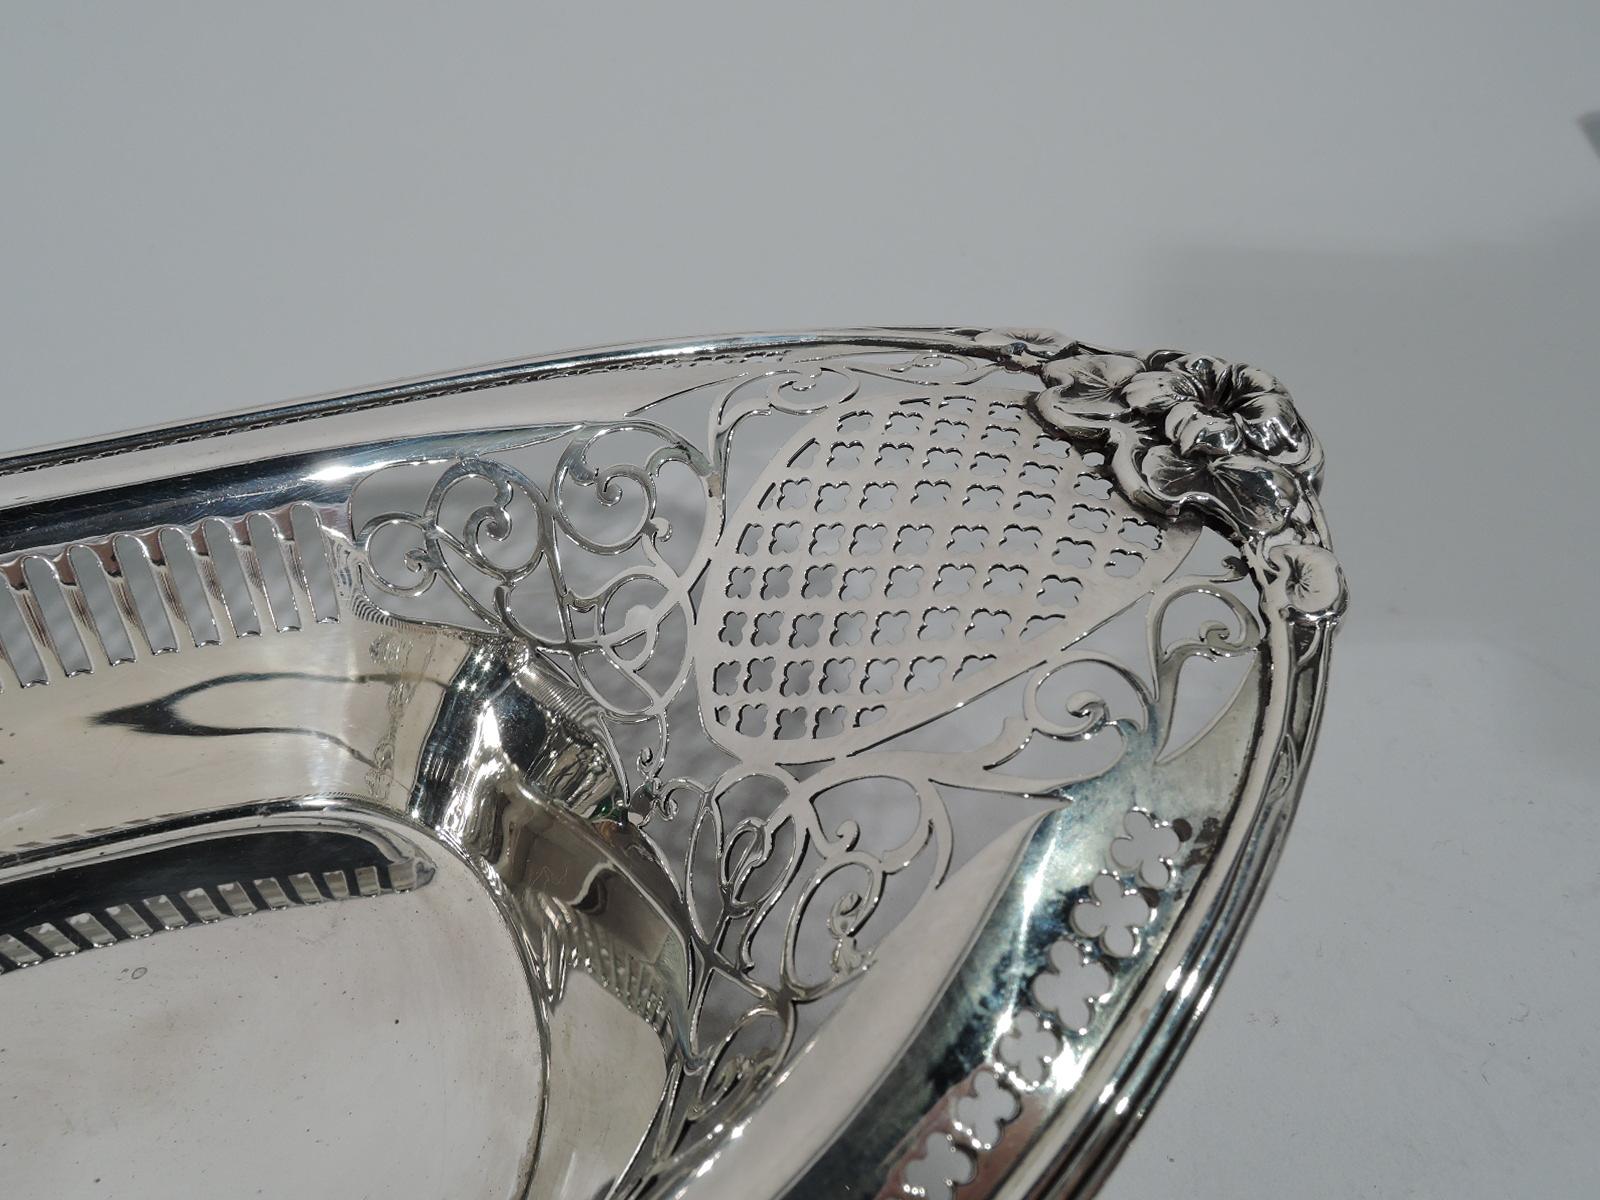 Edwardian sterling silver bread tray. Made by Gorham in Providence, circa 1900. Elongated oval with solid tubular well and pierced diaper, quatrefoils, scrolls, and colonnade. Pretty blossoms applied at ends. Hallmark includes no. A5324. Weight: